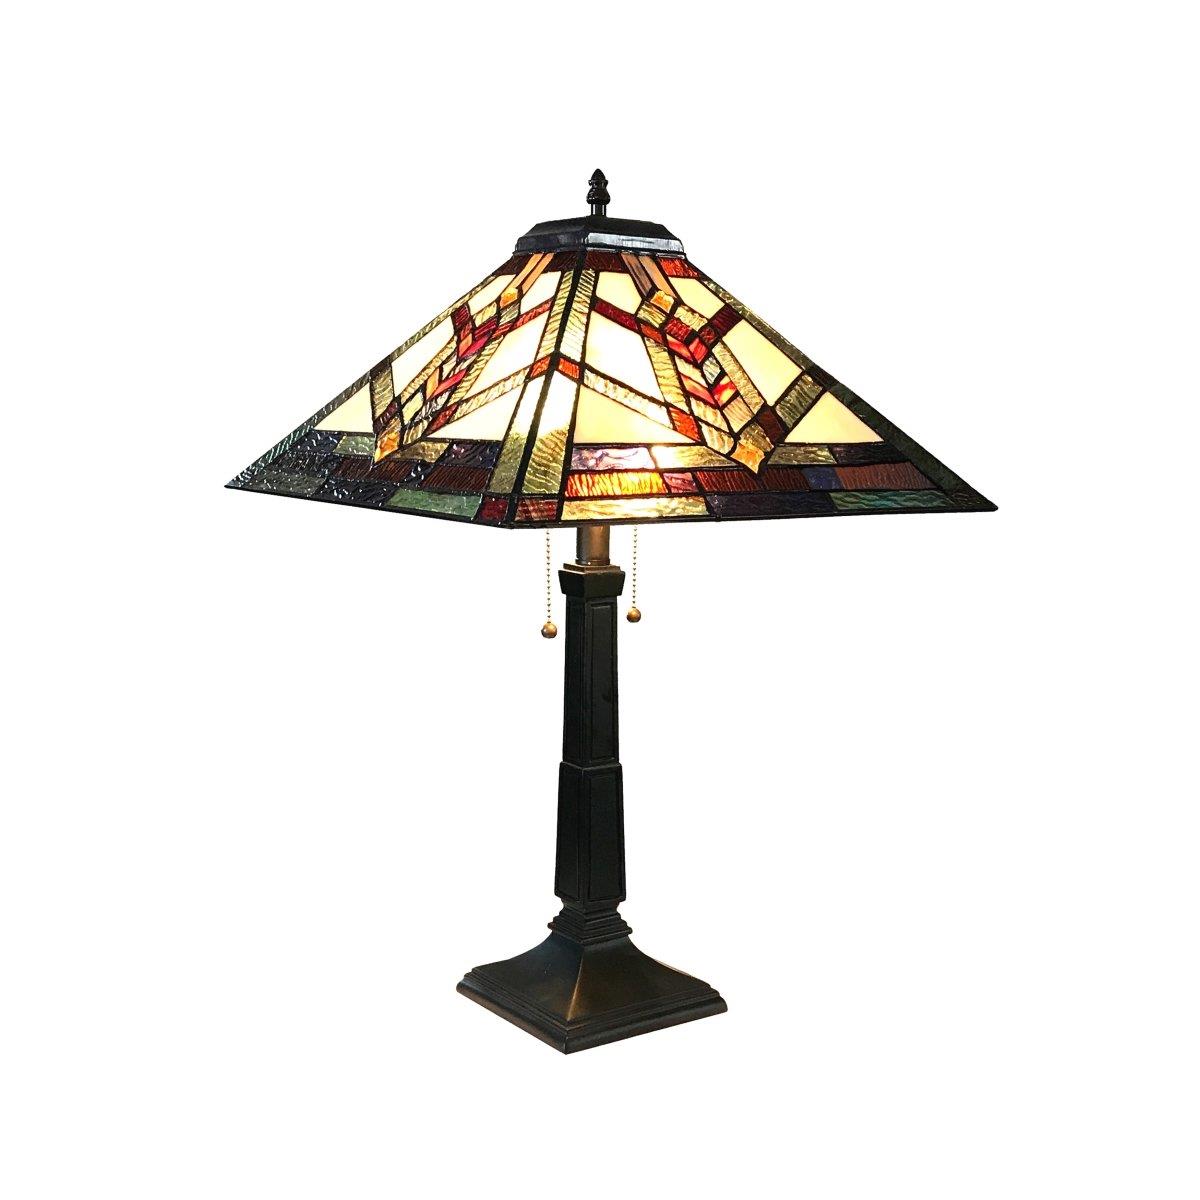 Ch1t182am16-tl2 Wylie Tiffany-style 2 Light Mission Table Lamp - 16 In. Shade